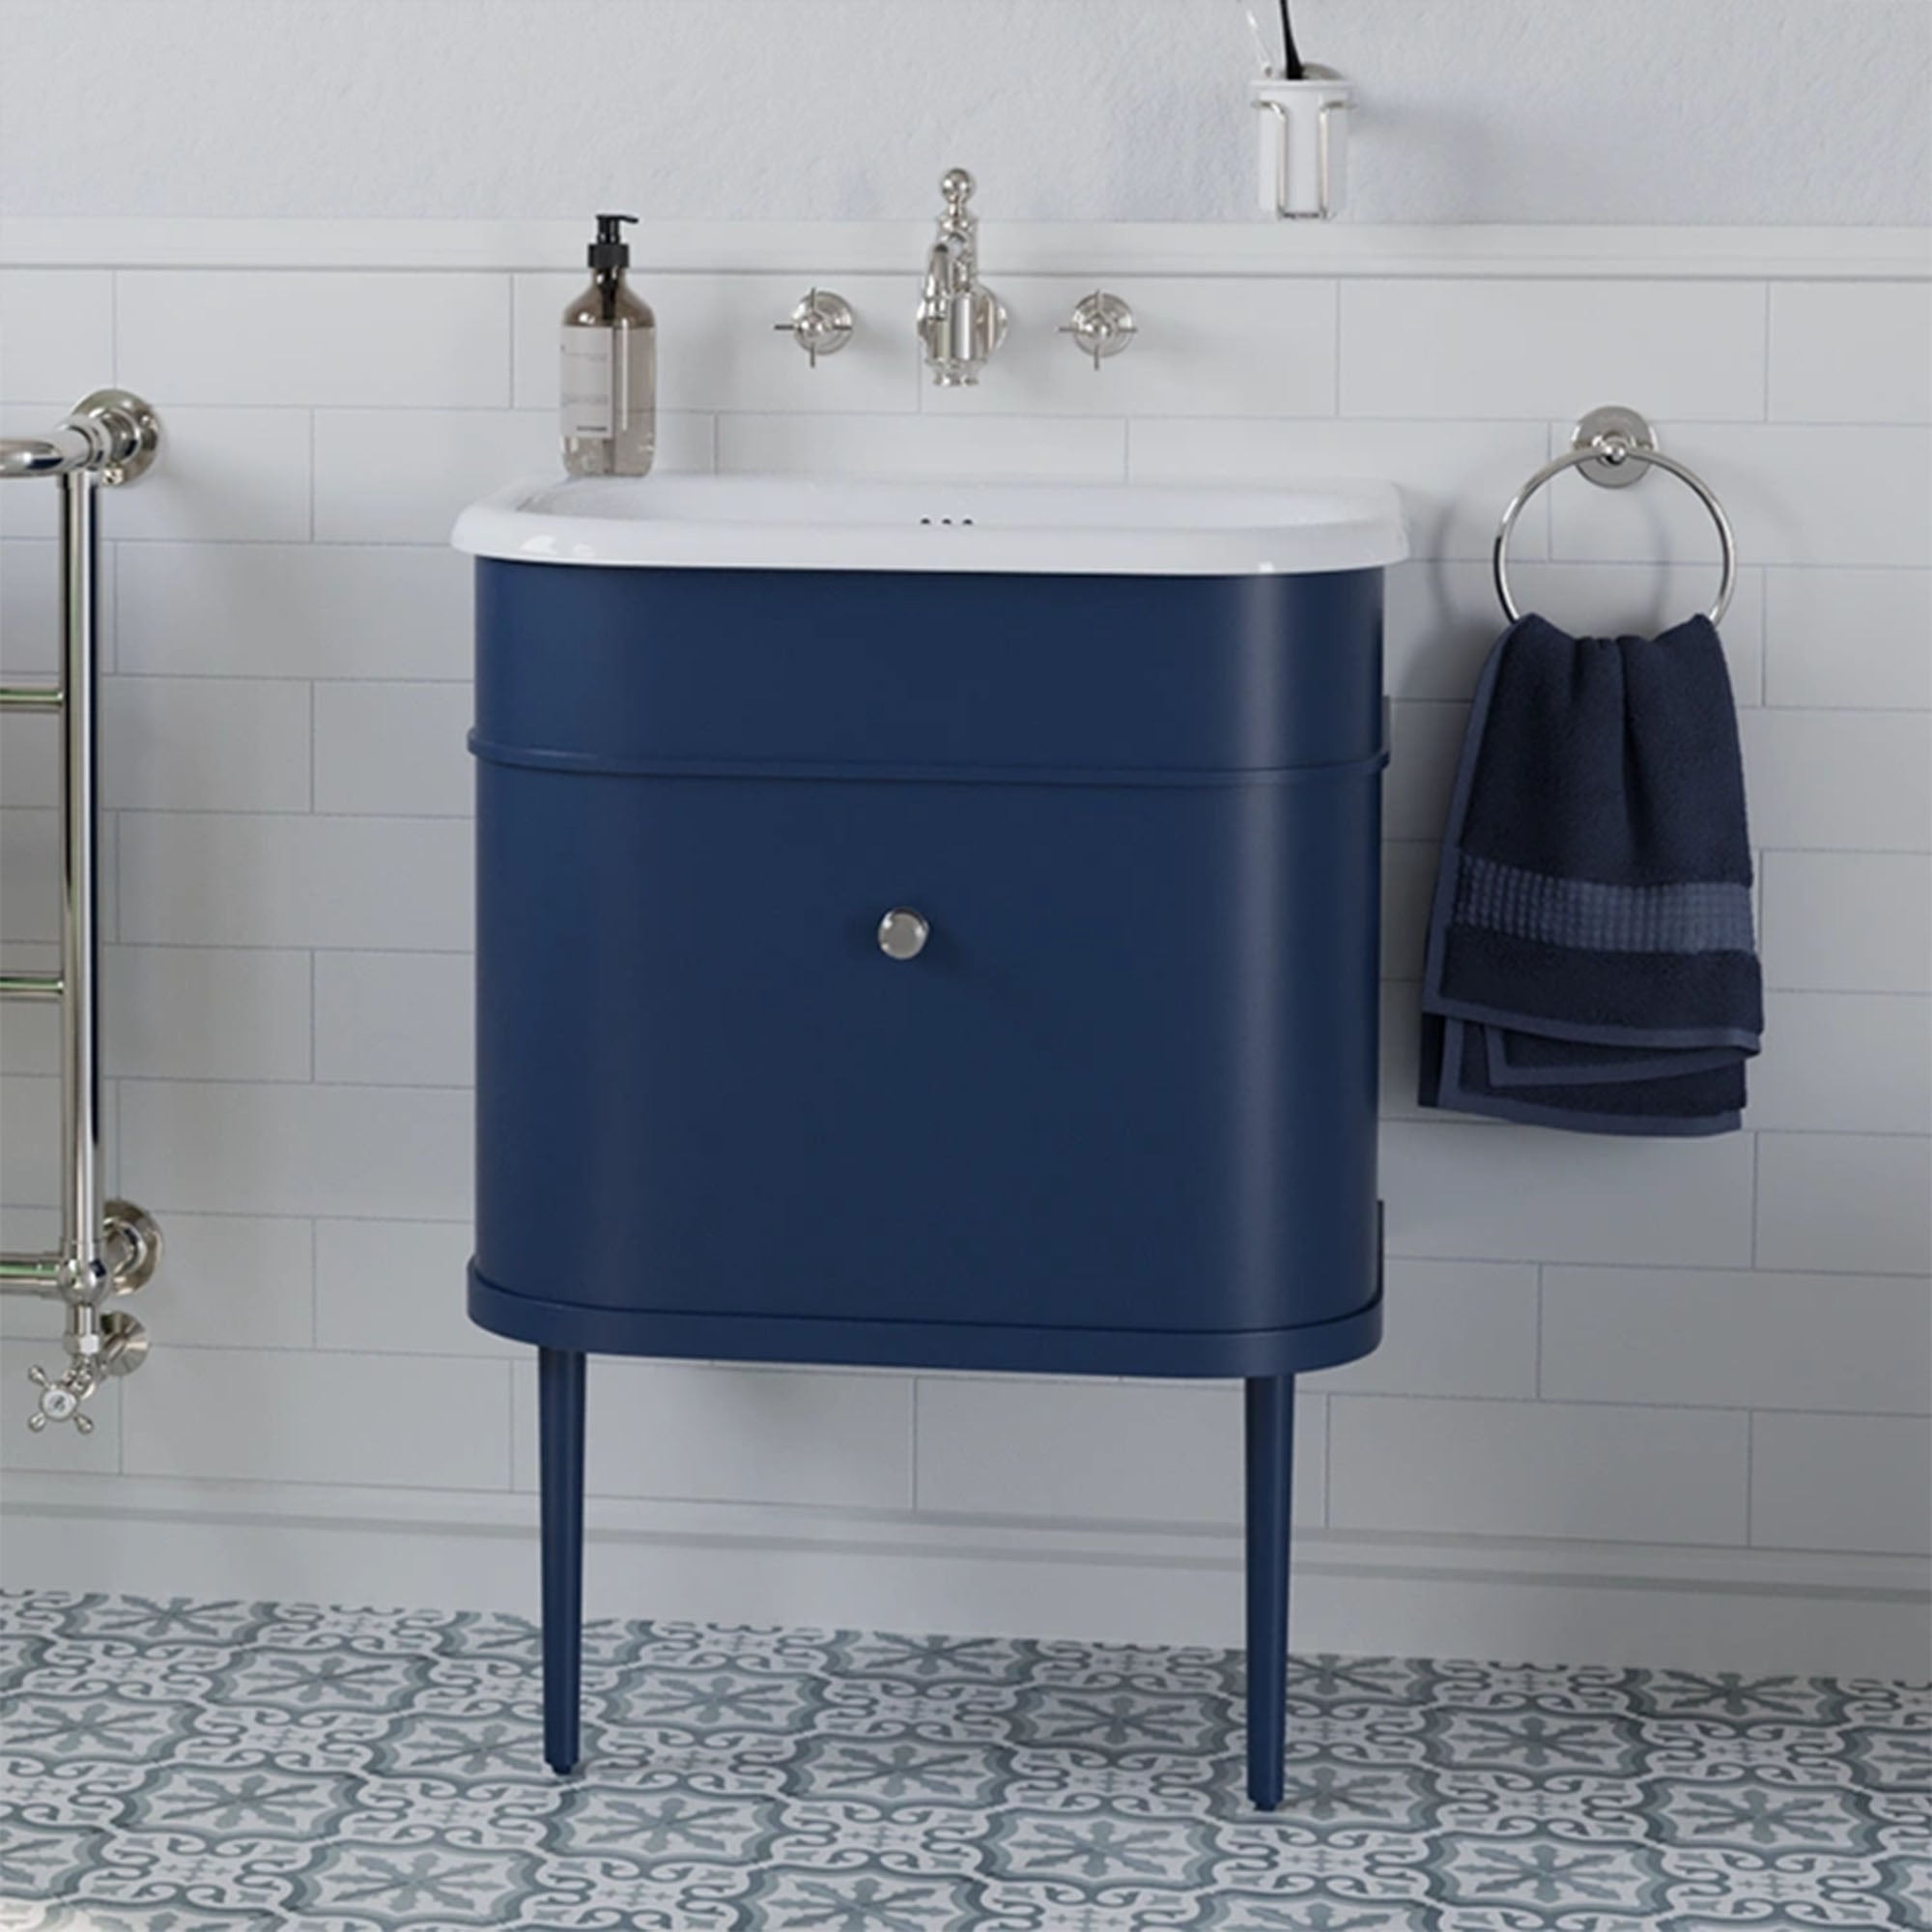 burlington chalfont 550mm wall mounted vanity with roll top basin blue